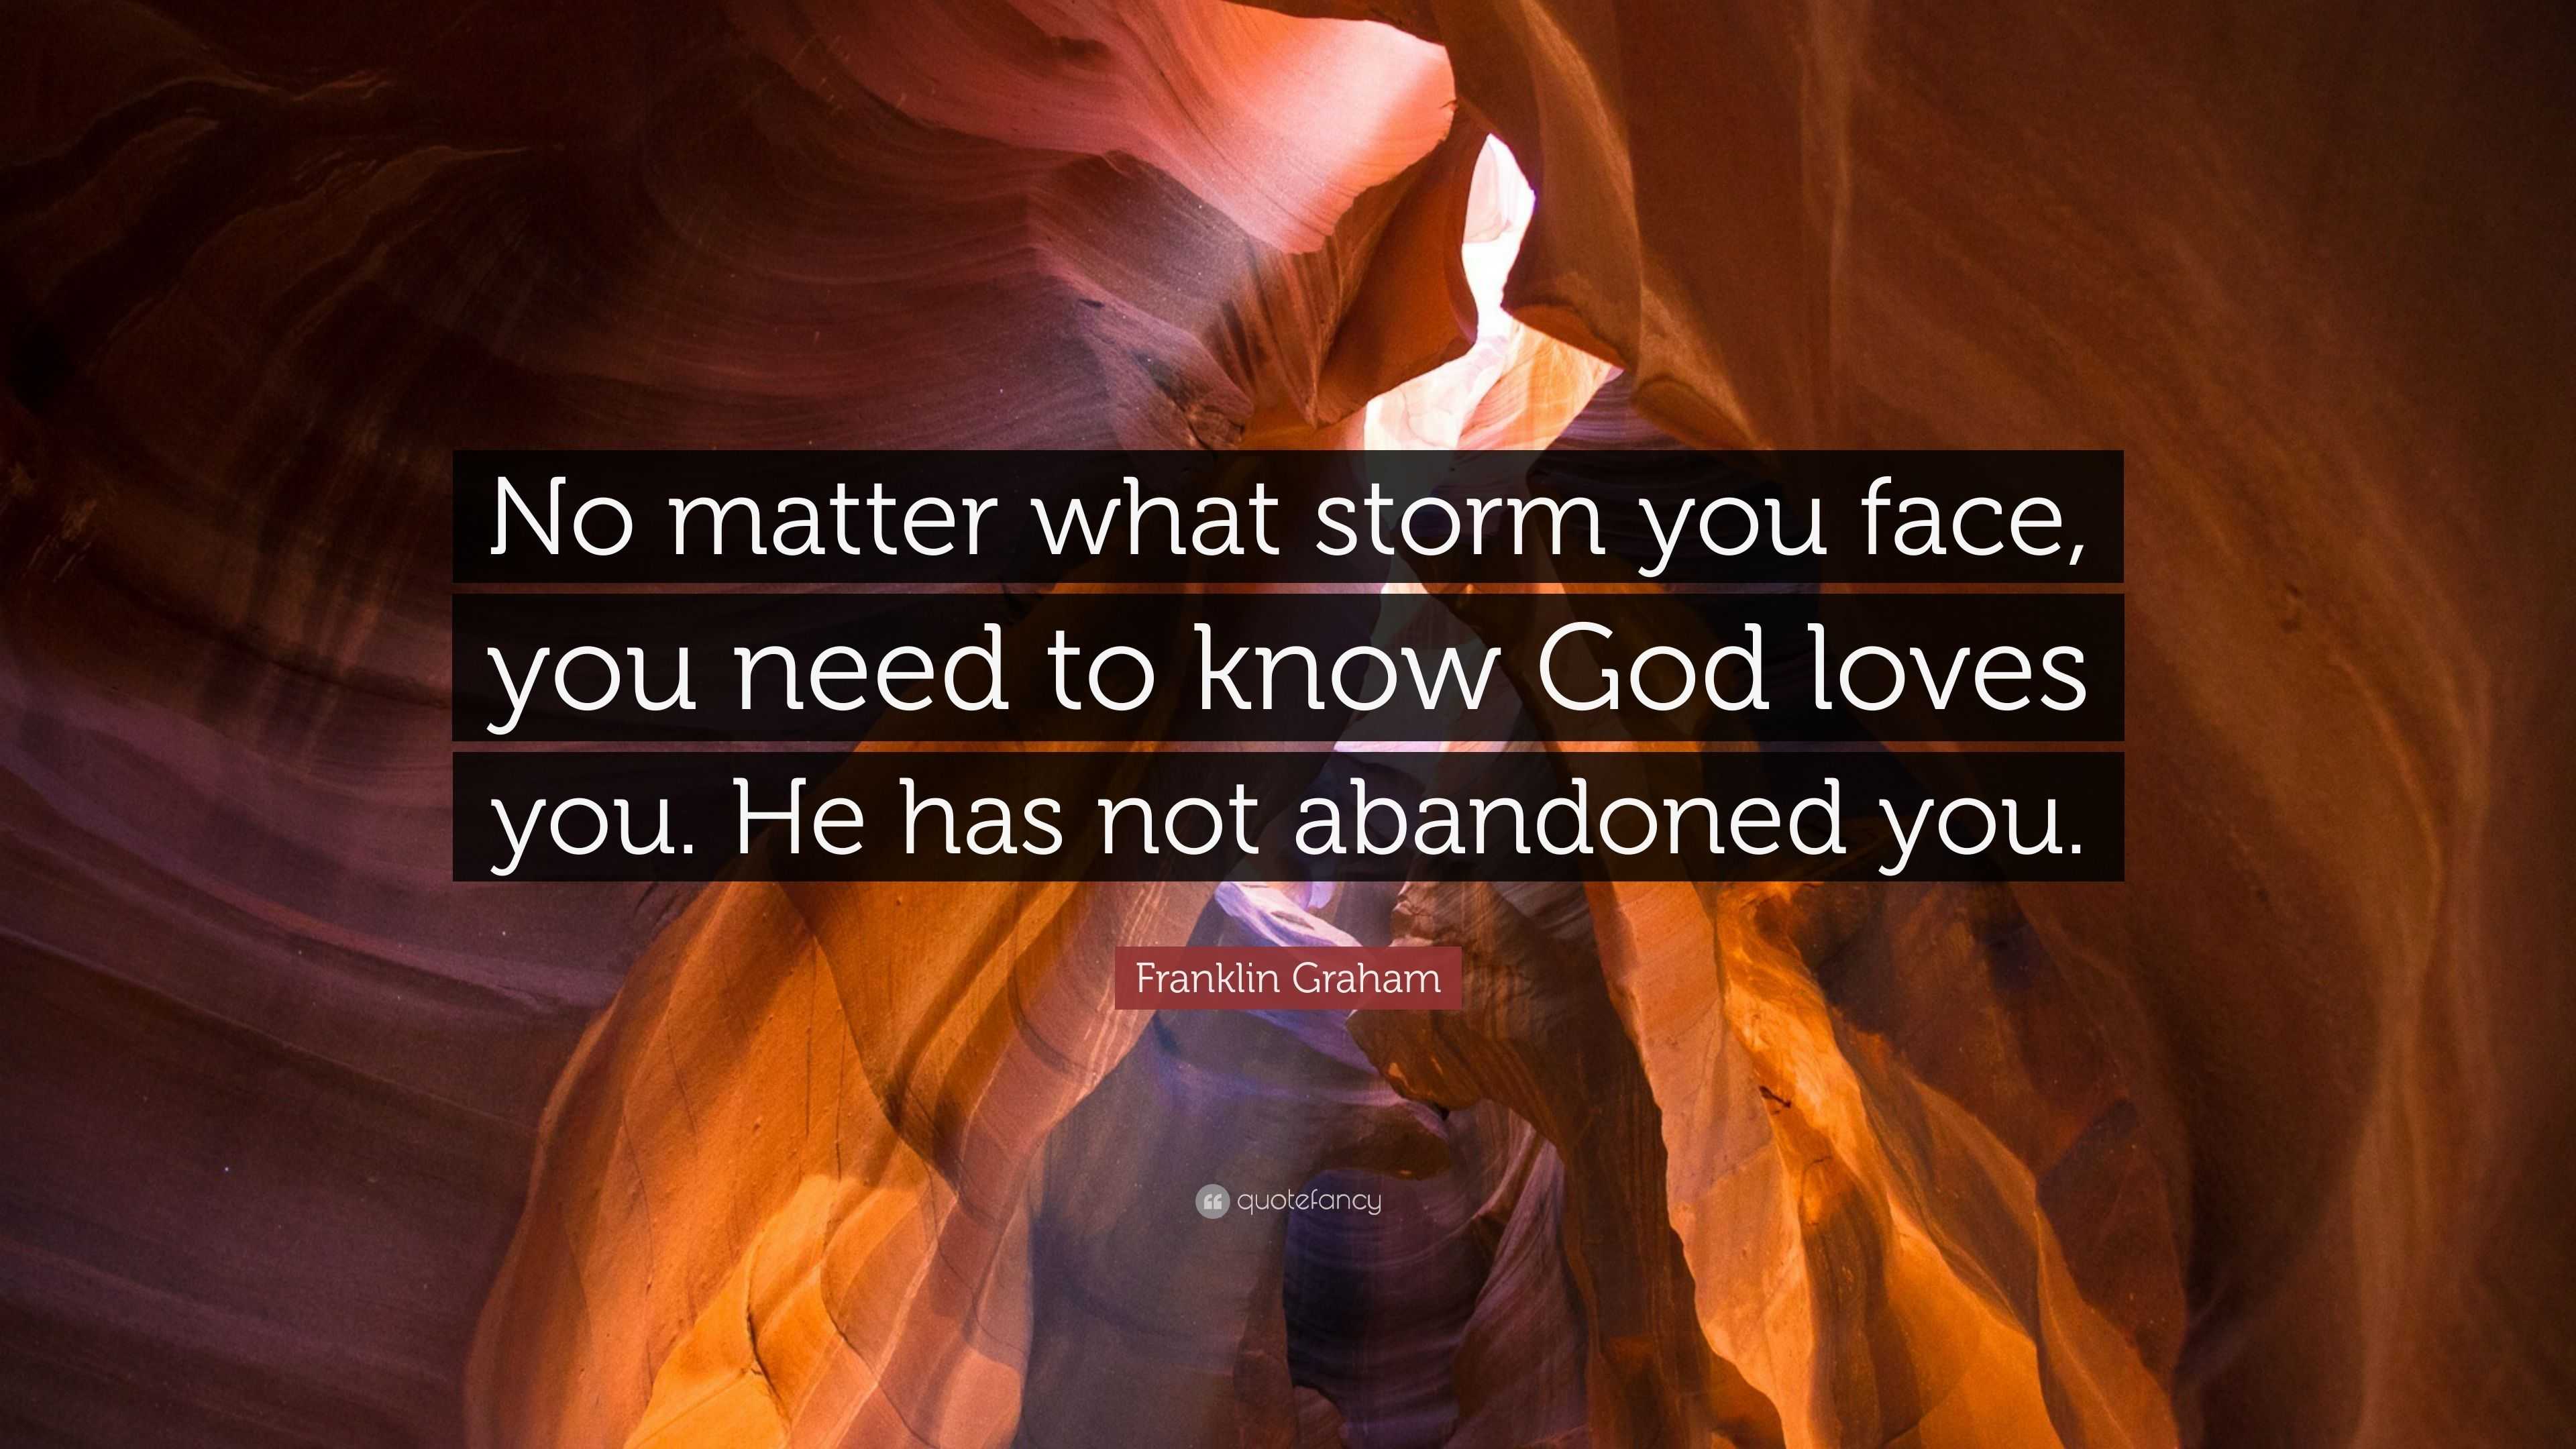 Franklin Graham Quote “No matter what storm you face you need to know